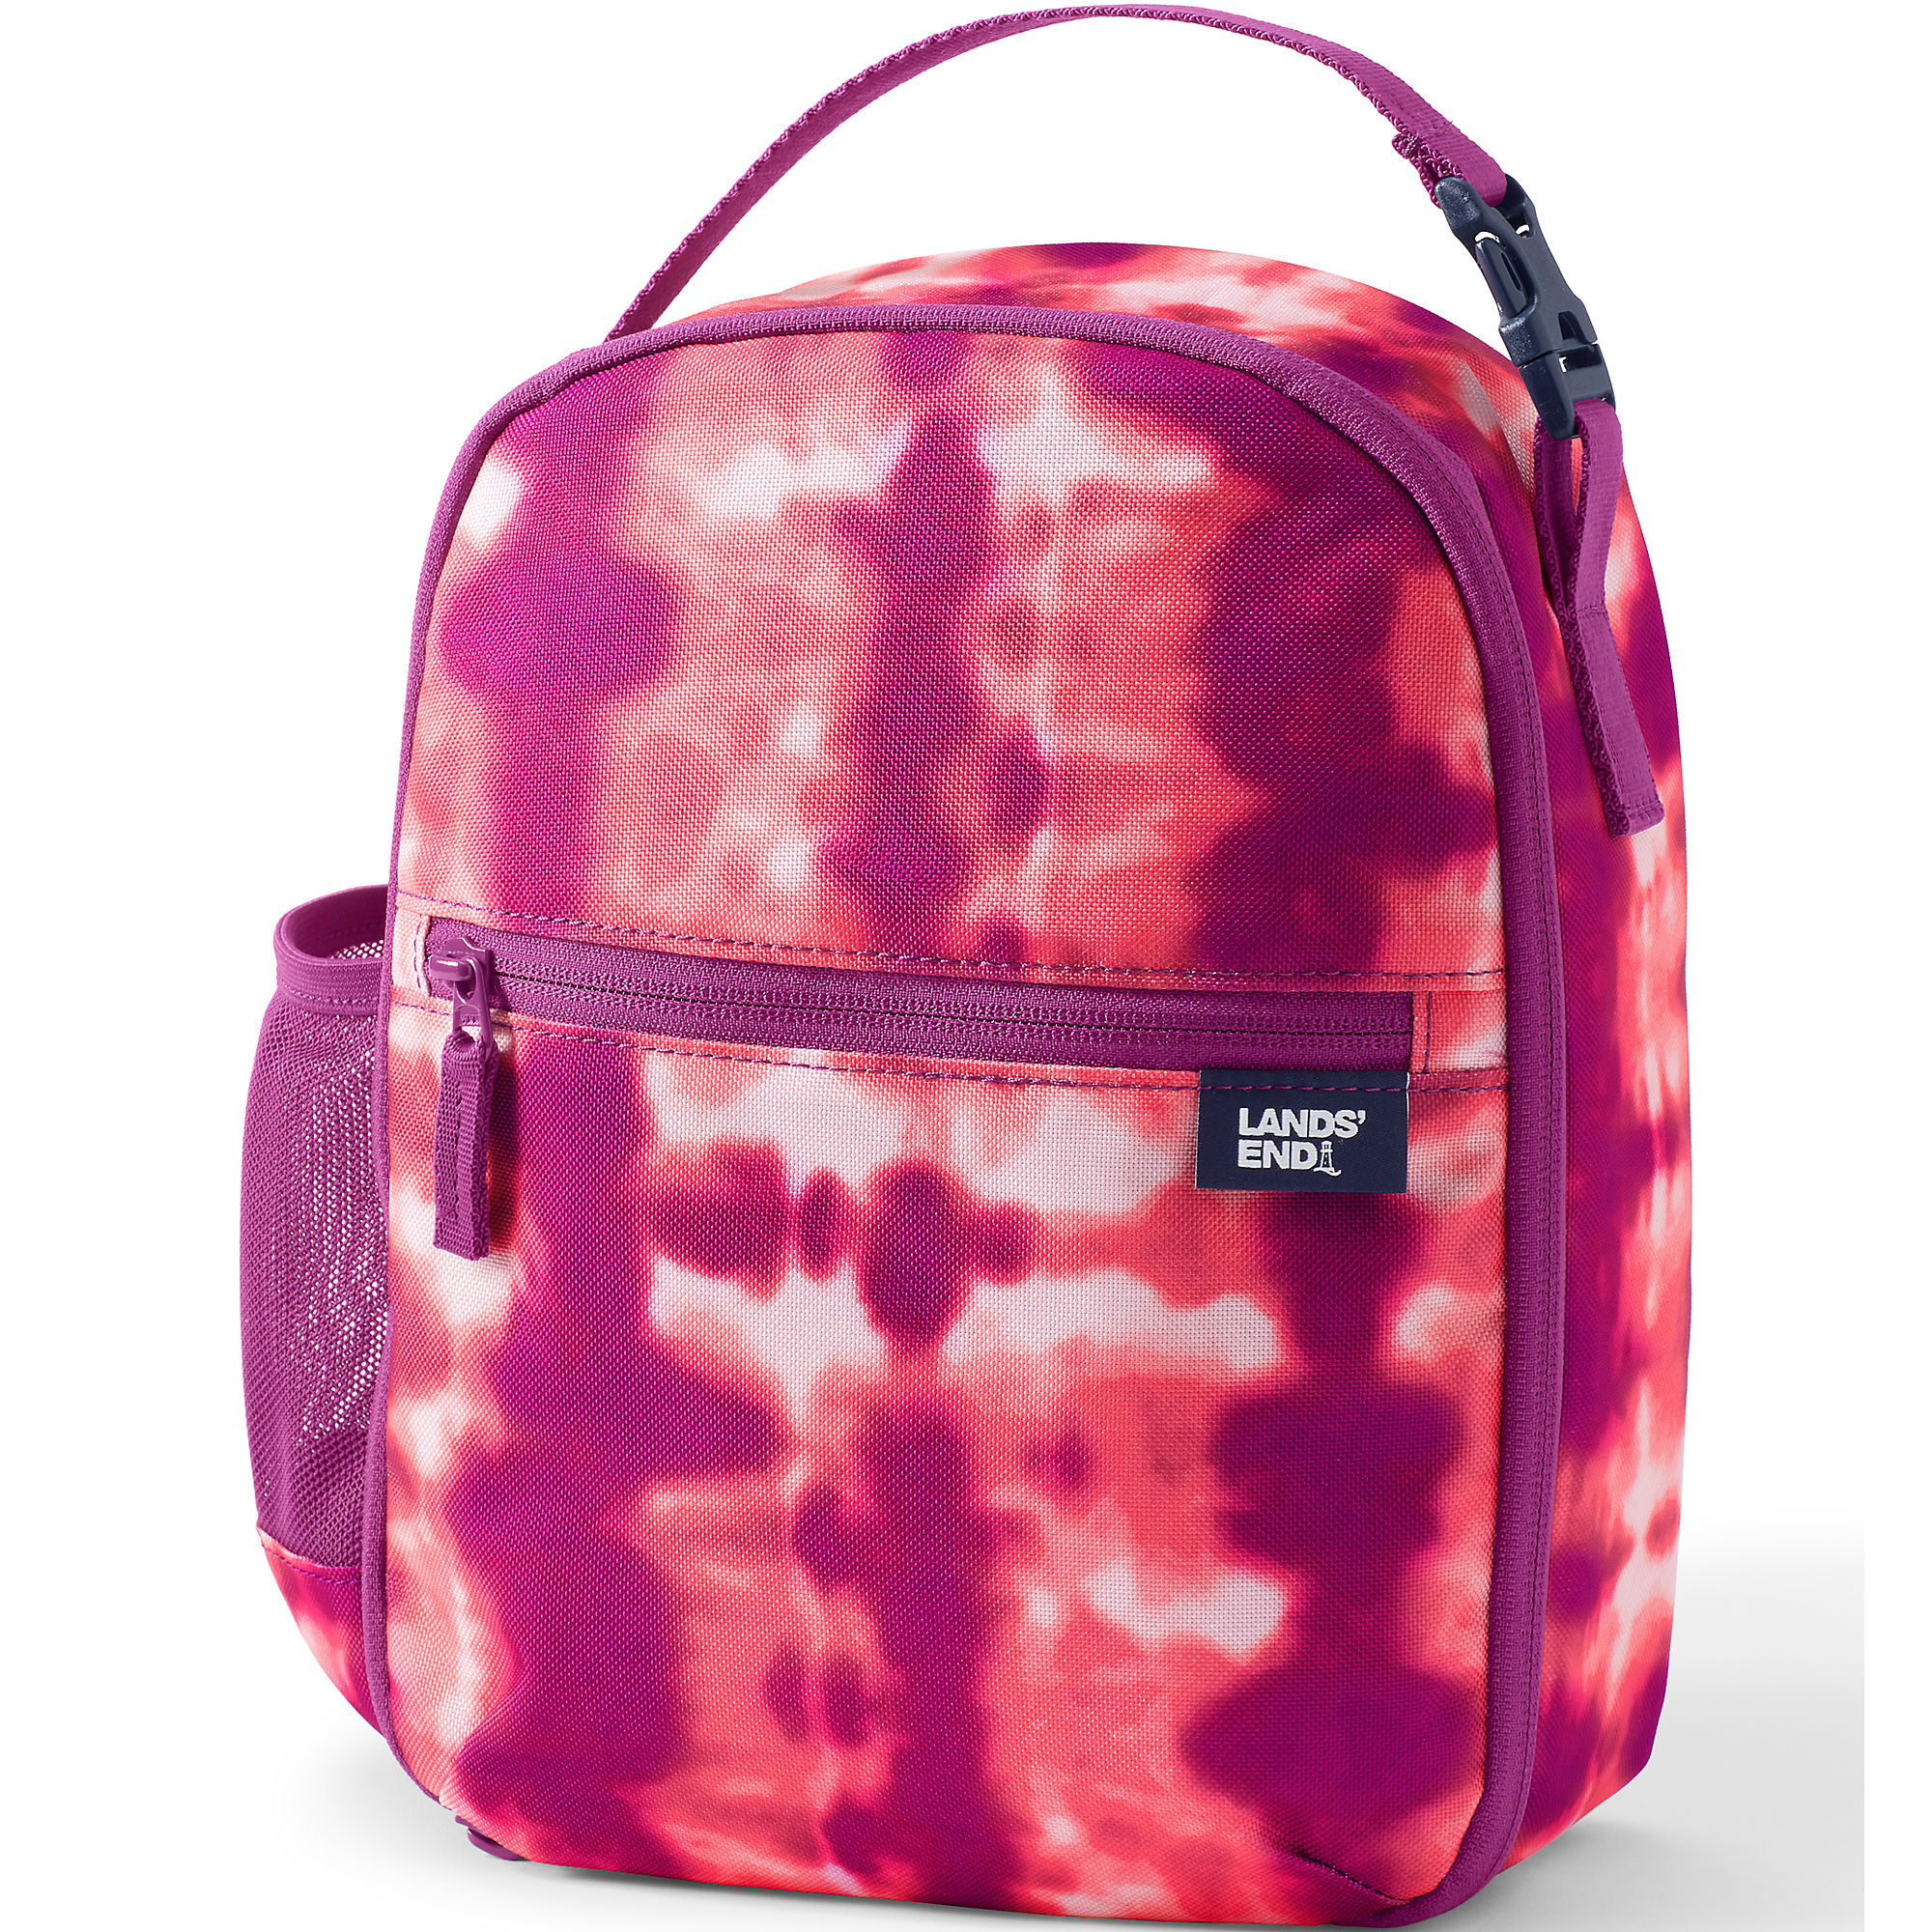 Lands End Kid's Insulated Soft Sided Lunch Box (Fuchsia Tie Dye)